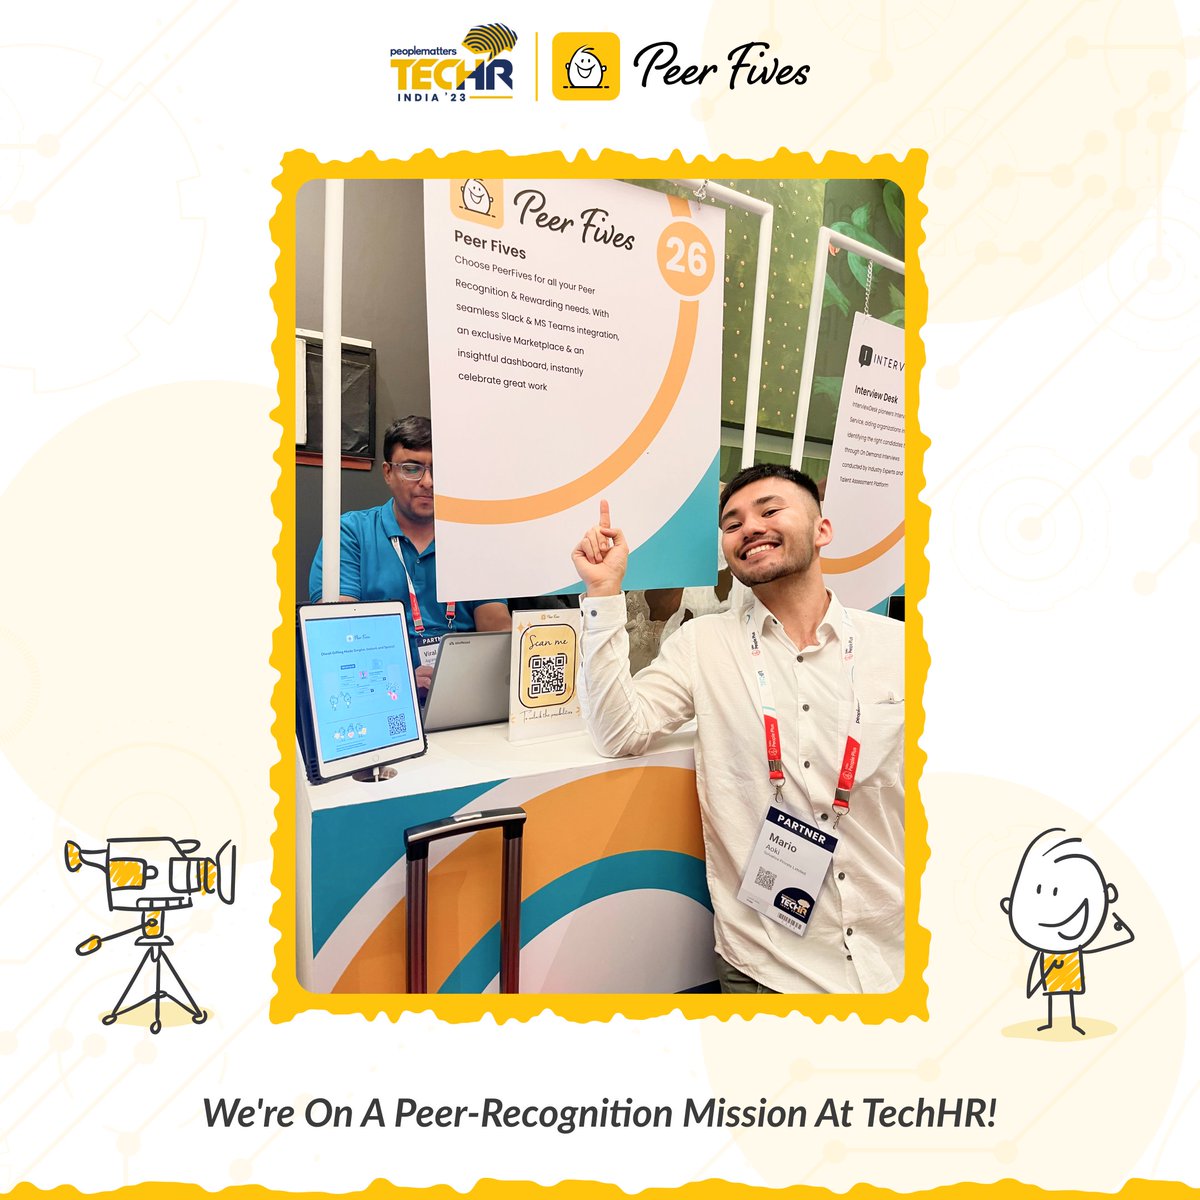 Look who's stealing the show at TechHR! Team PeerFives, turning heads and transforming peer recognition like never before!

Visit Now: PeerFives.com

#TechHRin #TechHR2023 #peoplematters #HRtech #FutureOfTech #FutureofWork #HR #Peerfives